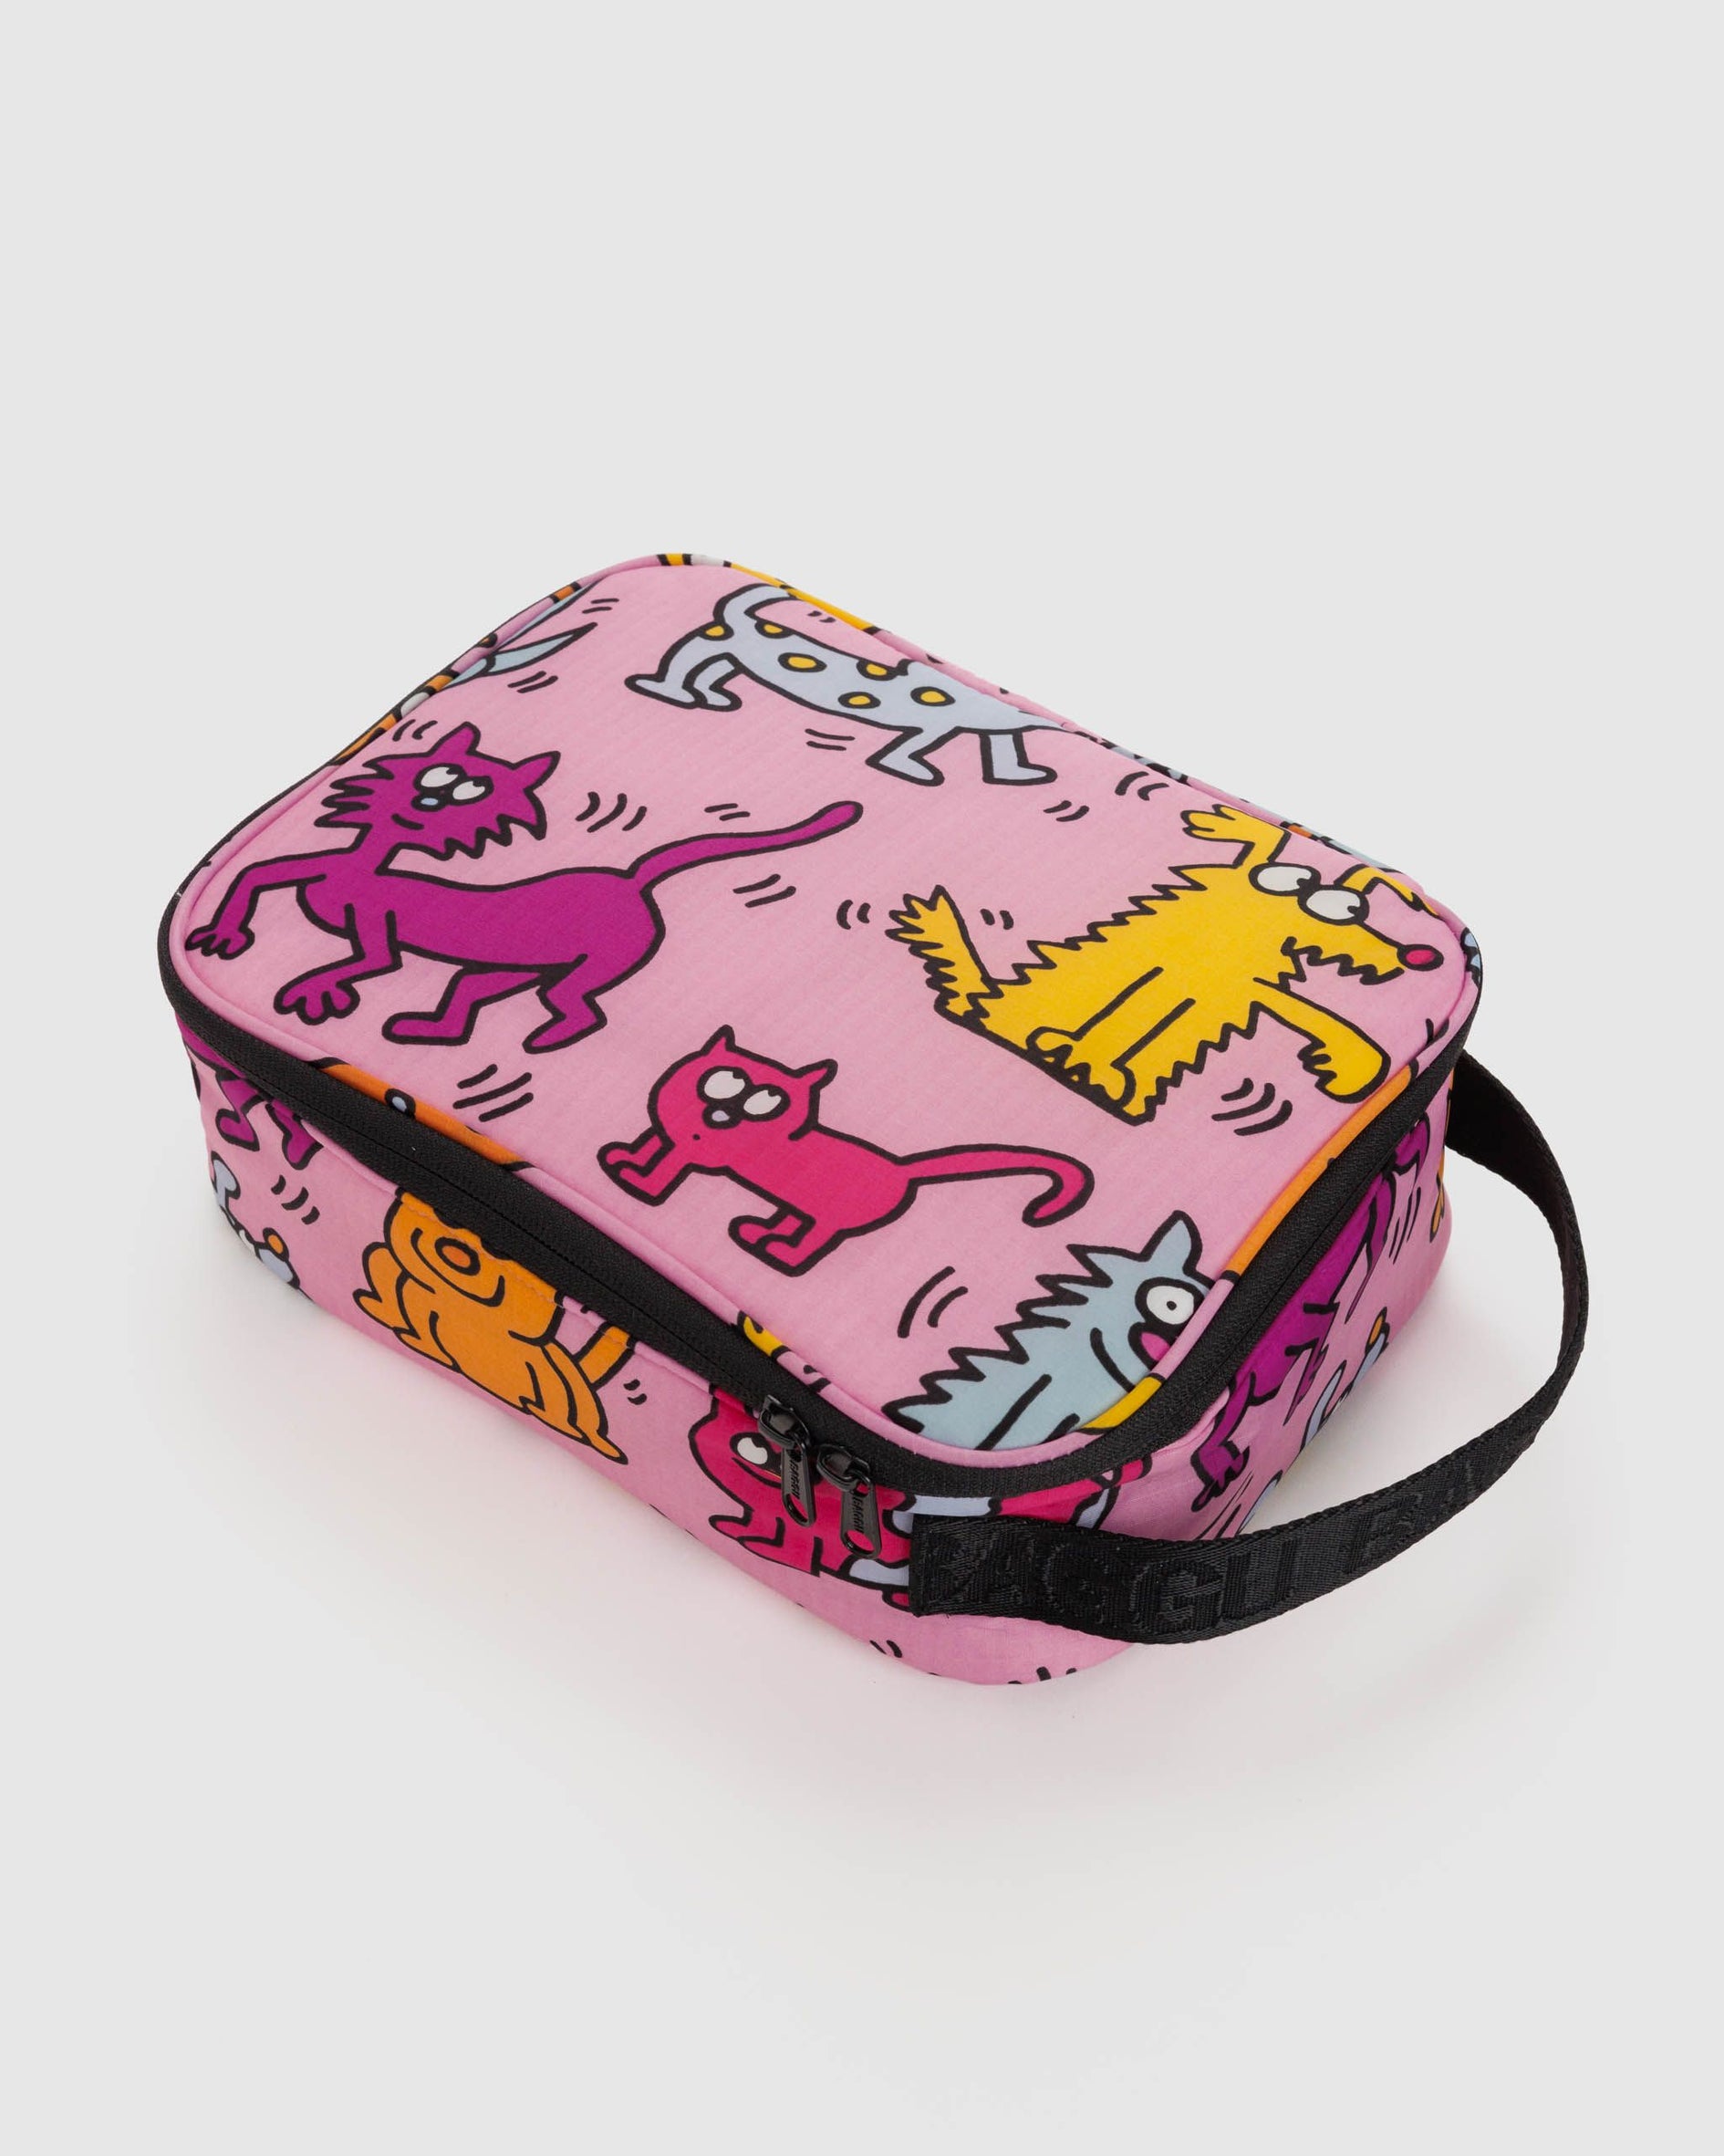 Lunch Box - Keith Haring Pets